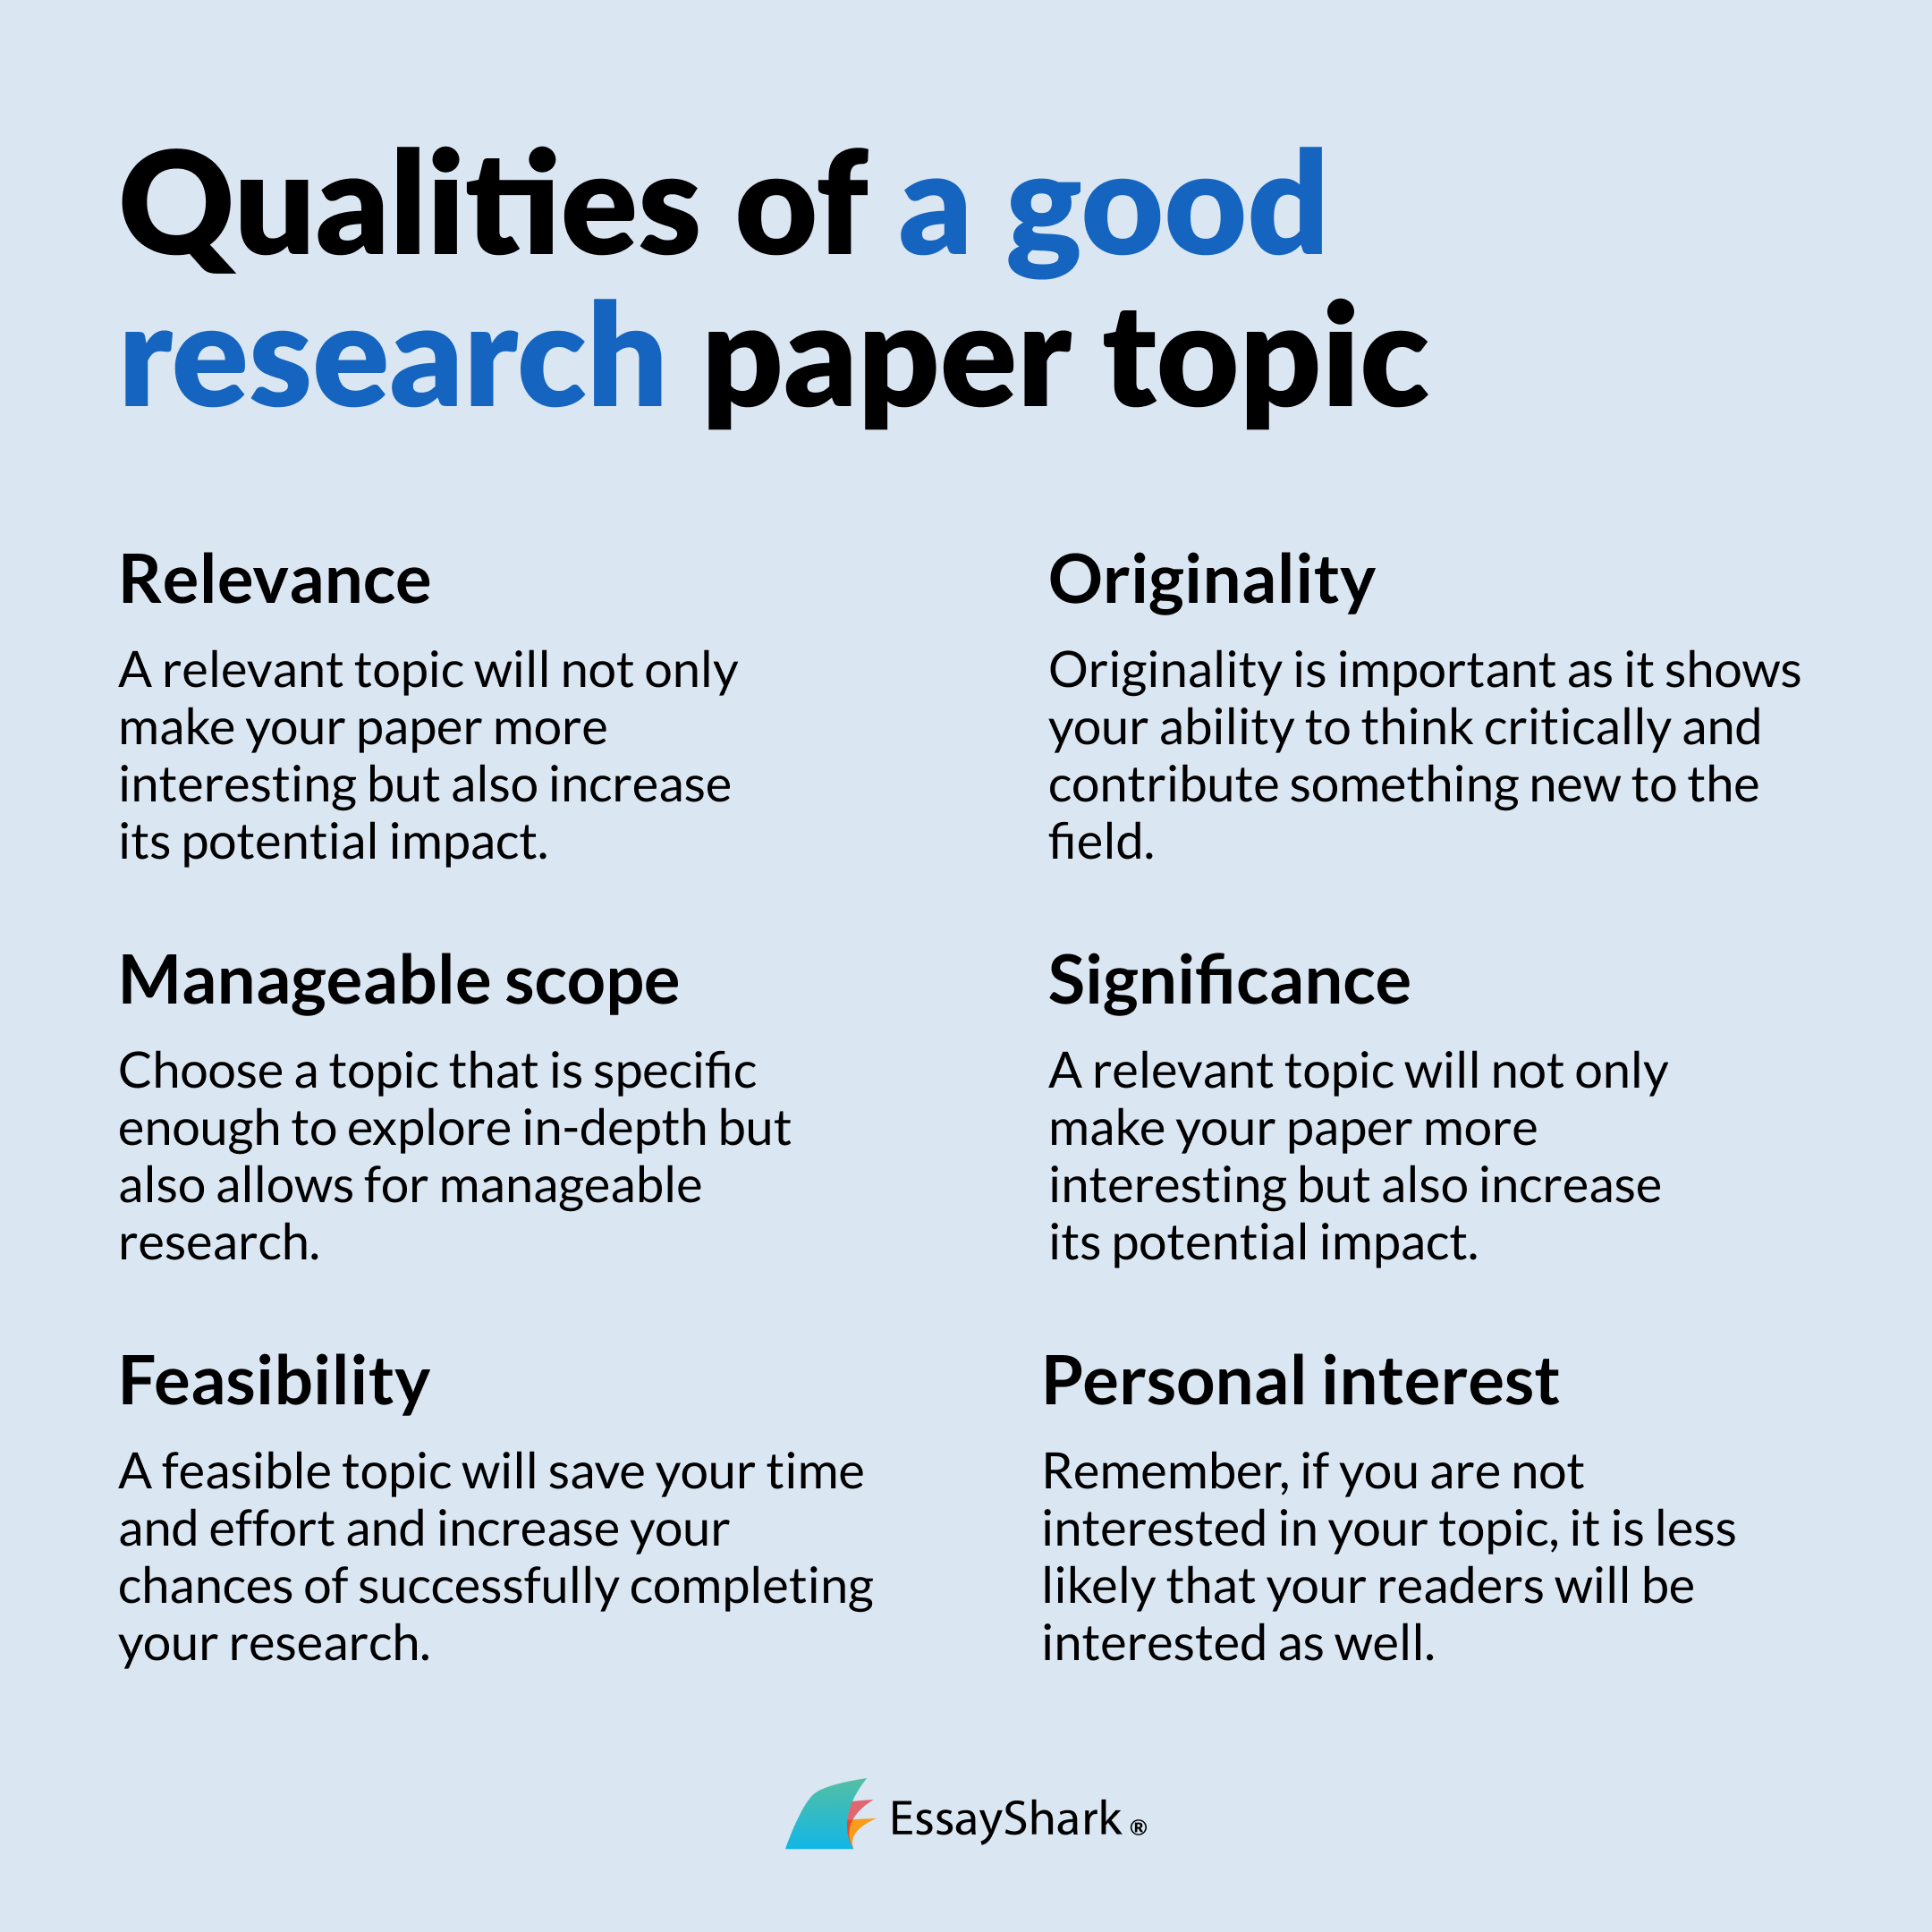 Qualities of a good research paper topic